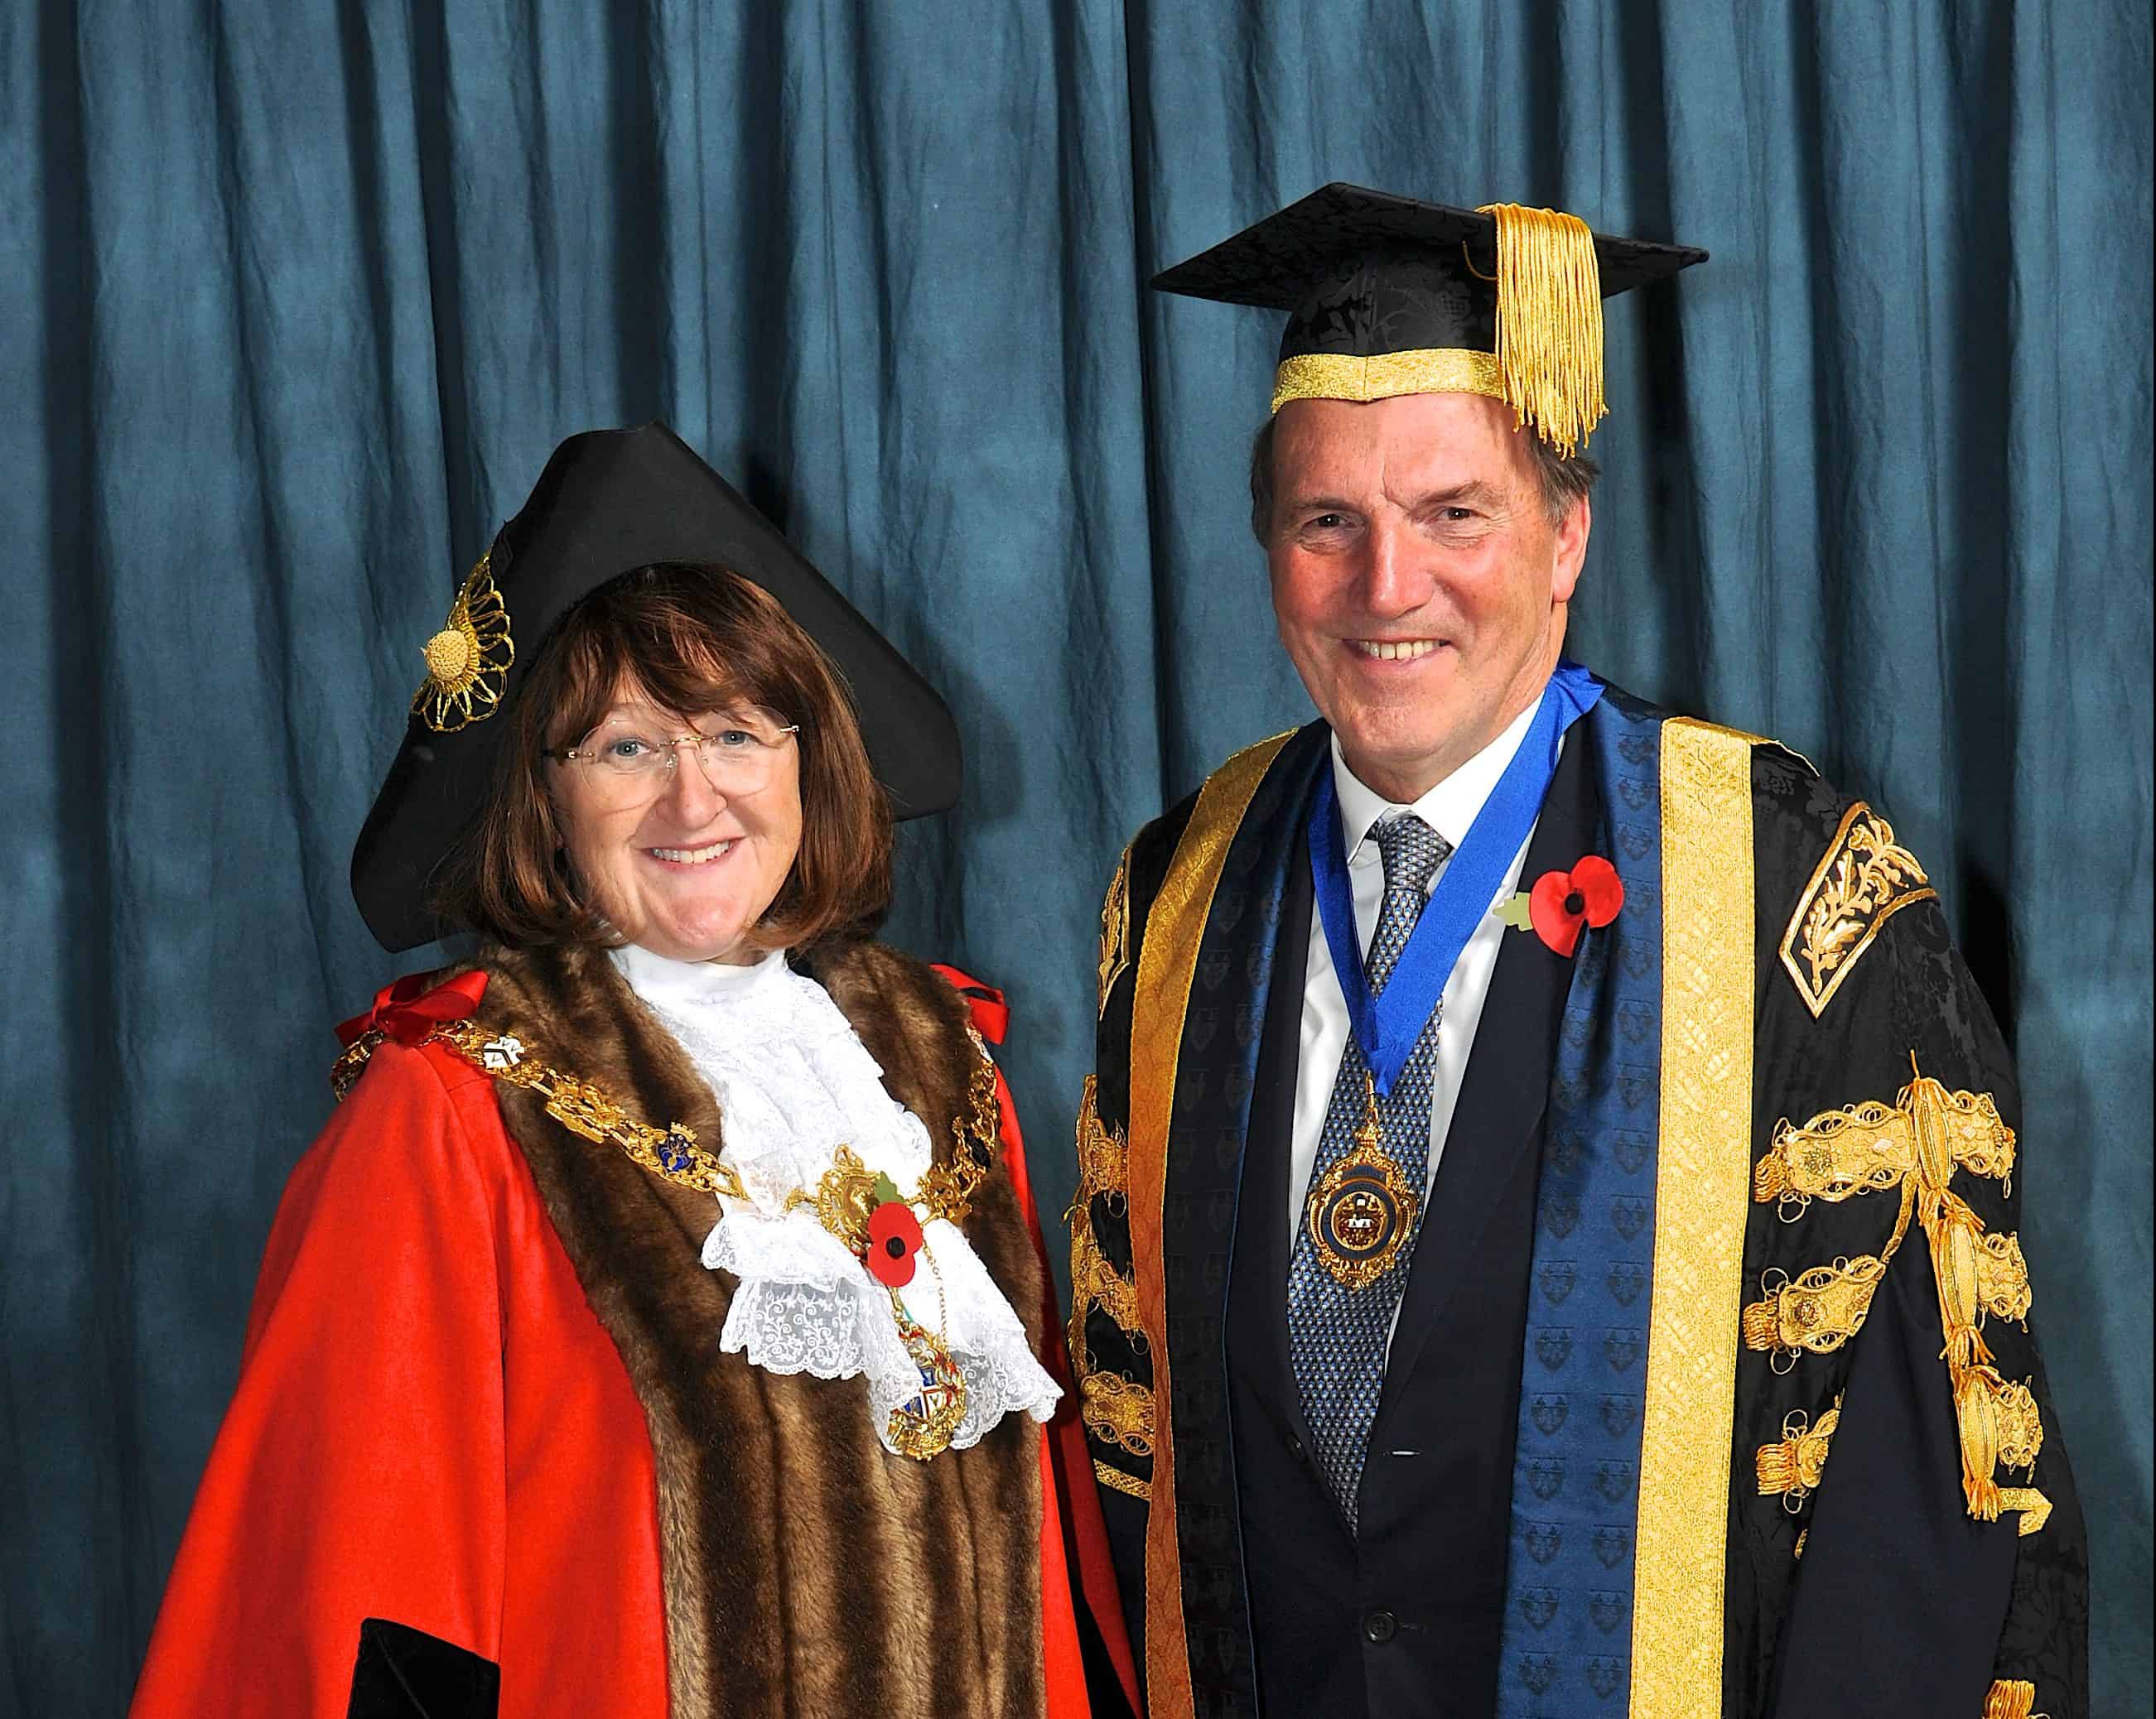 Sir Simon pictured during his inauguration with the Mayor of Southwark